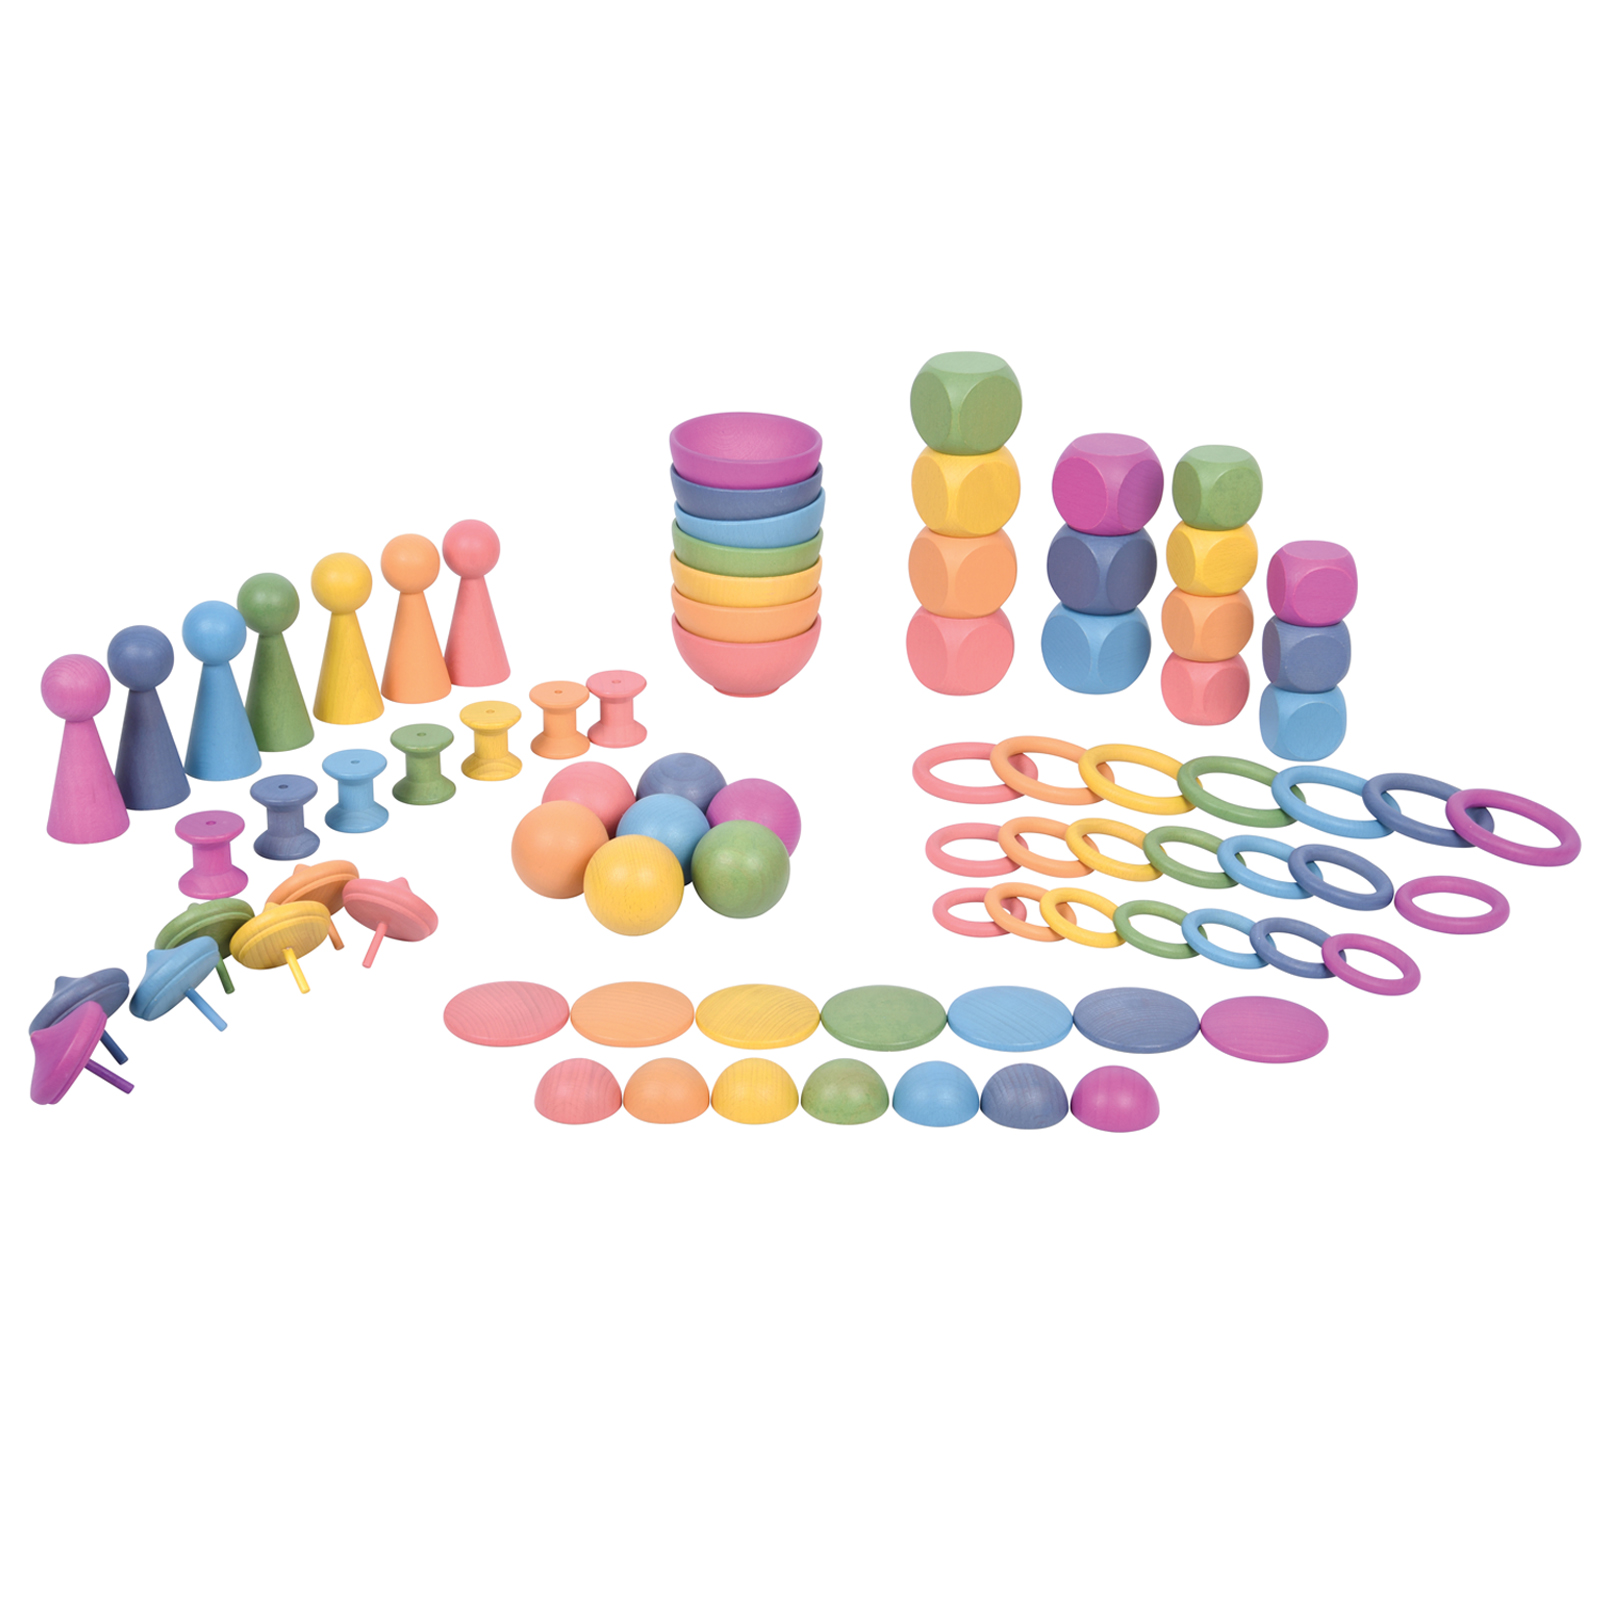 TickiT Rainbow Wooden Super Set - Set of 84 - 12 Different Shapes in 7 Colors image number null